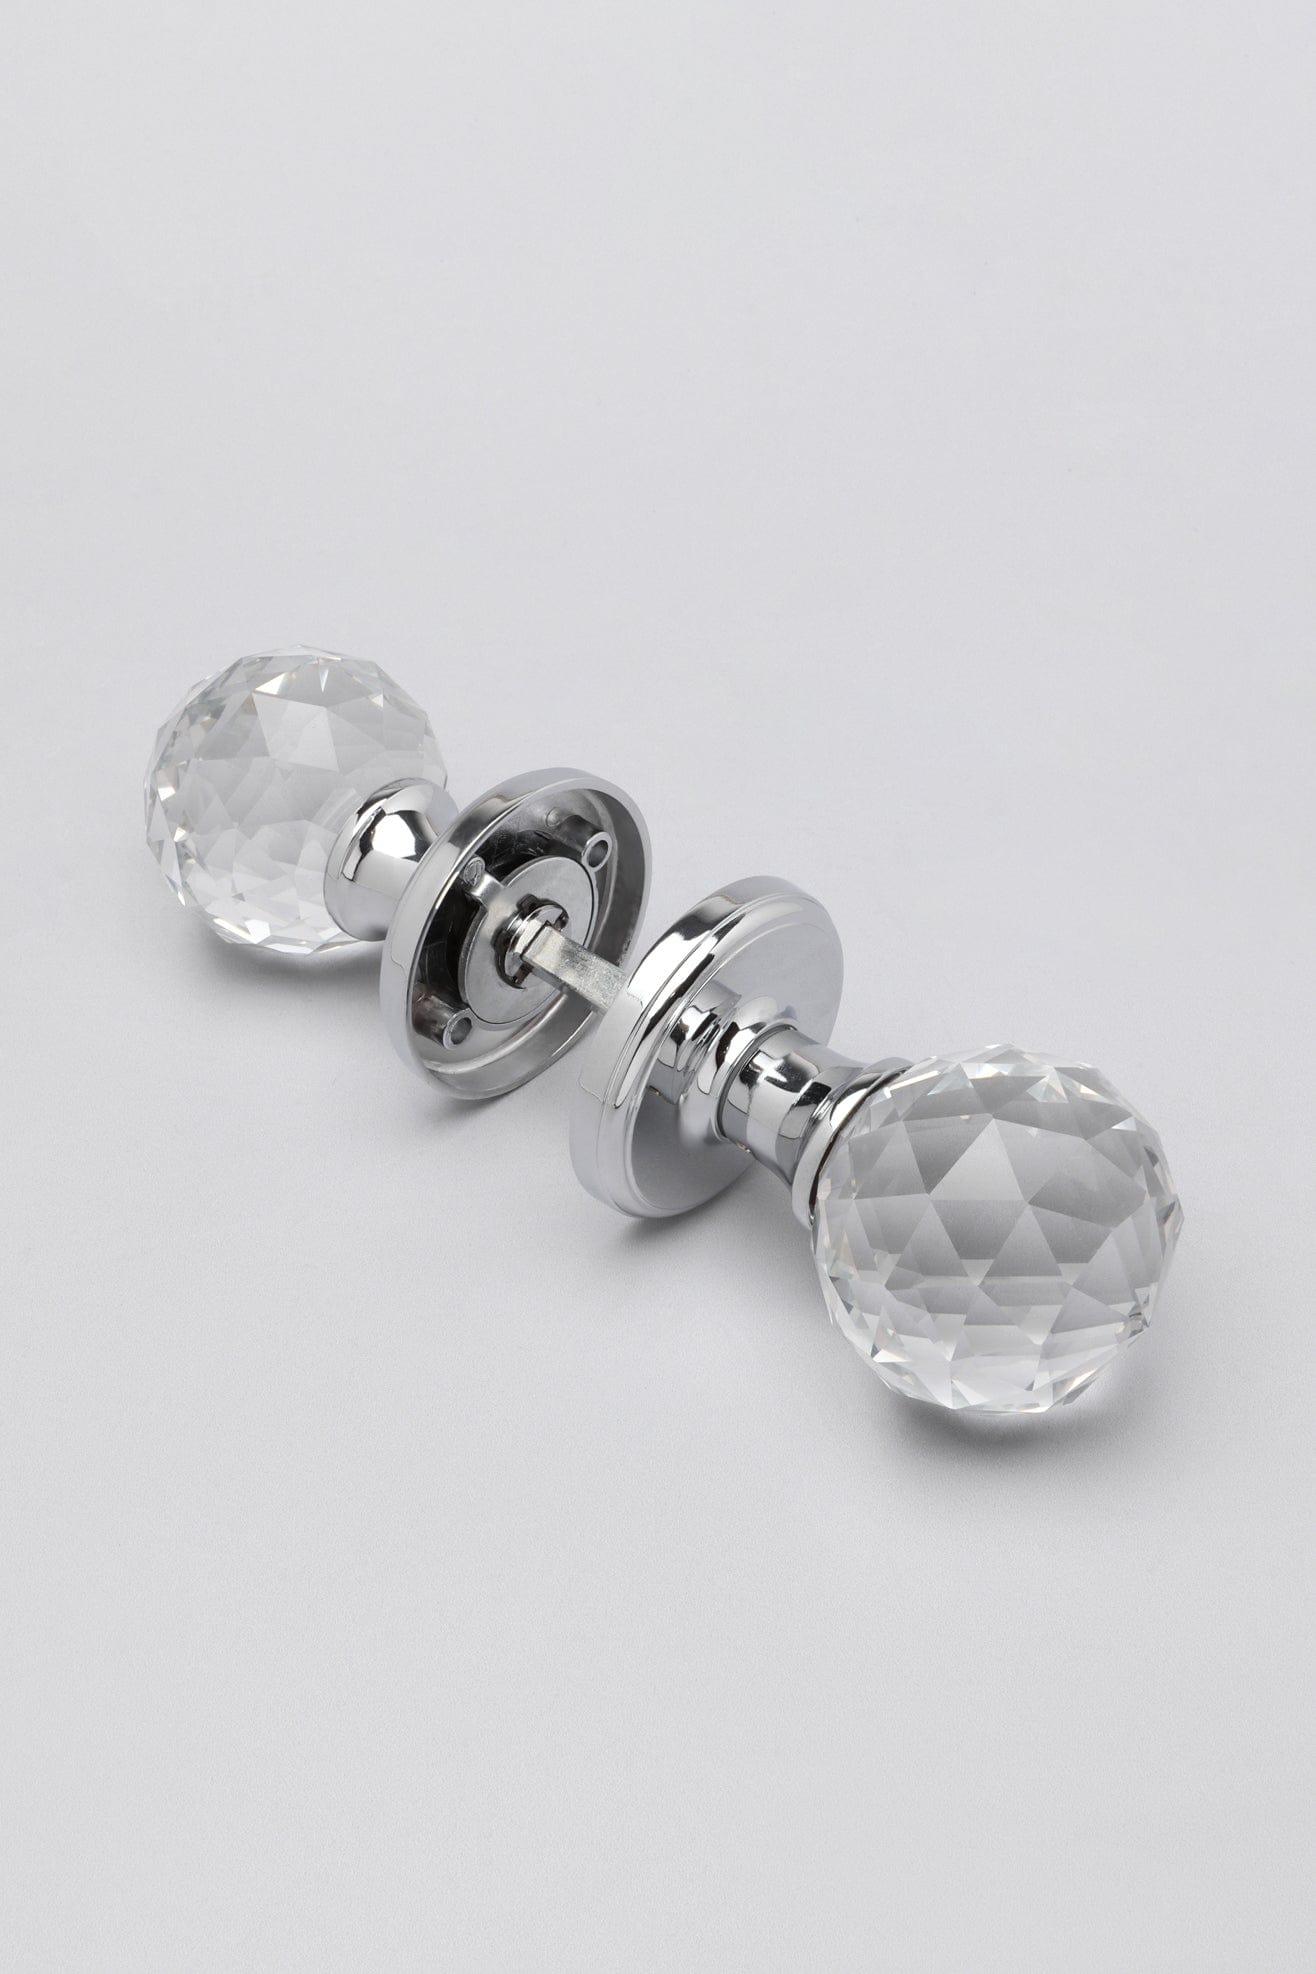 Gdecorstore Mortice Door Knobs Clear Solid Round Crystal Cut Faceted Clear Glass Mortice Door Knobs Set